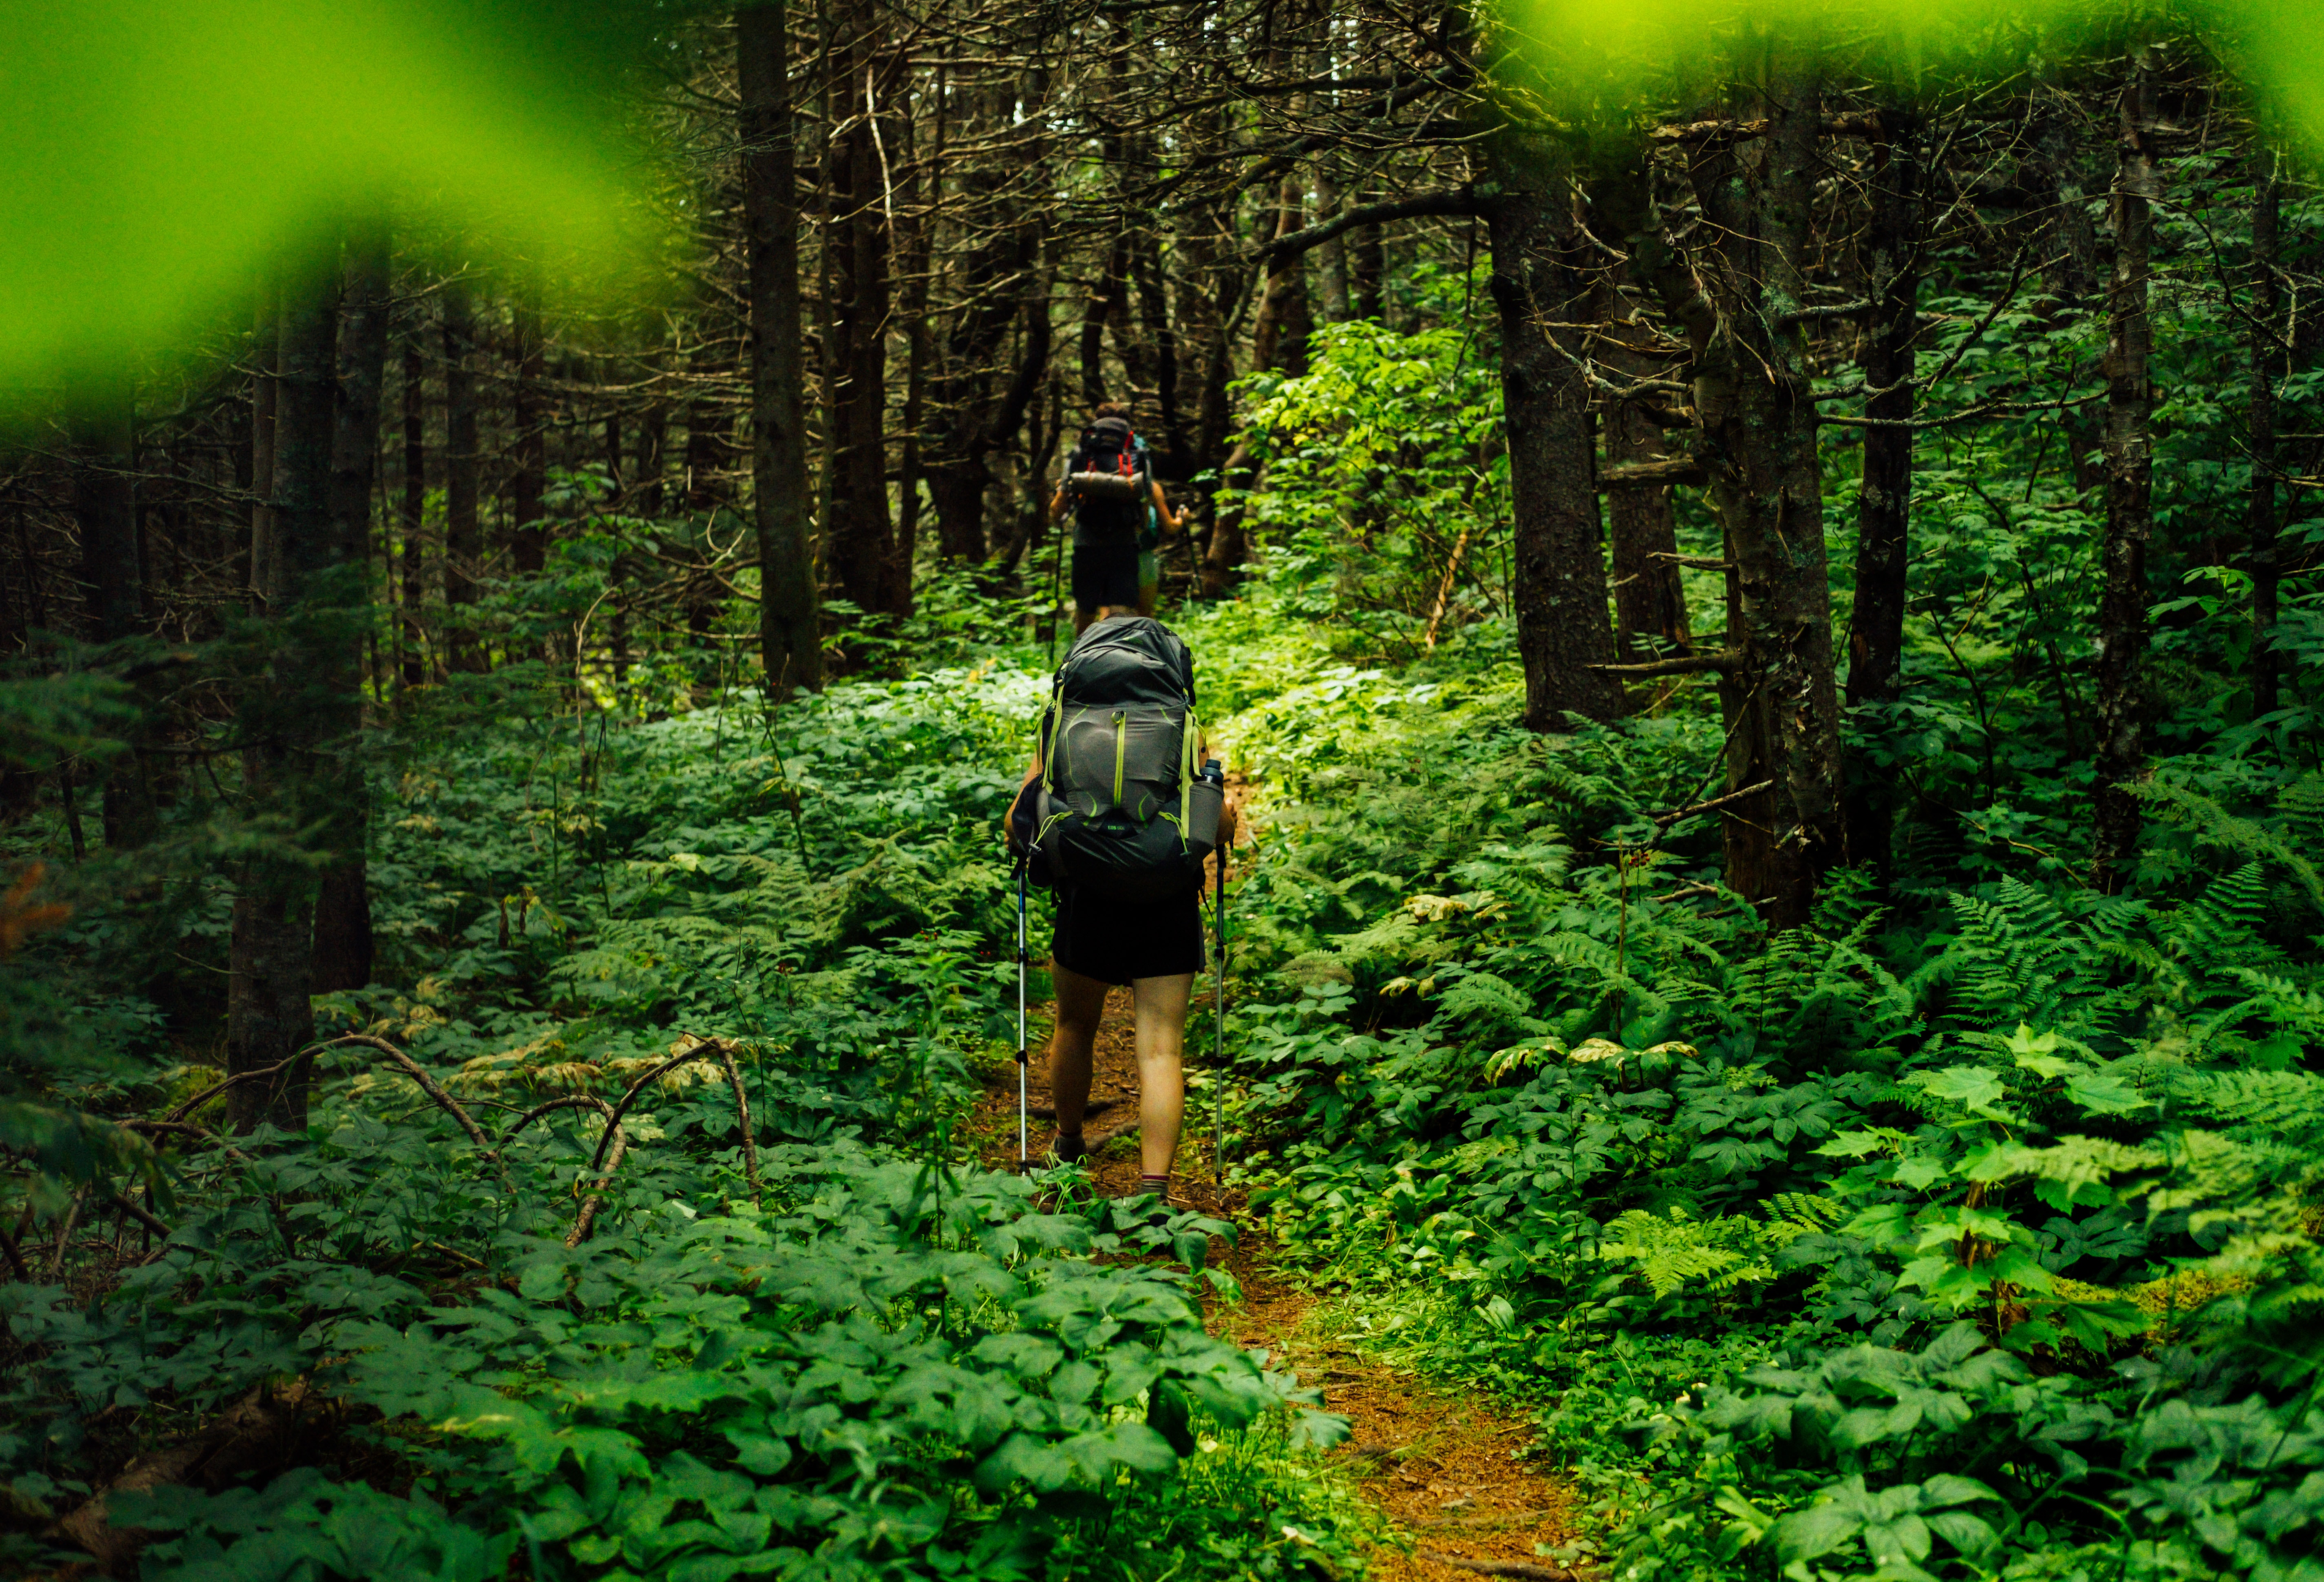 Hikers walking through a forest using walking poles. Photo by Tim Foster on Unsplash